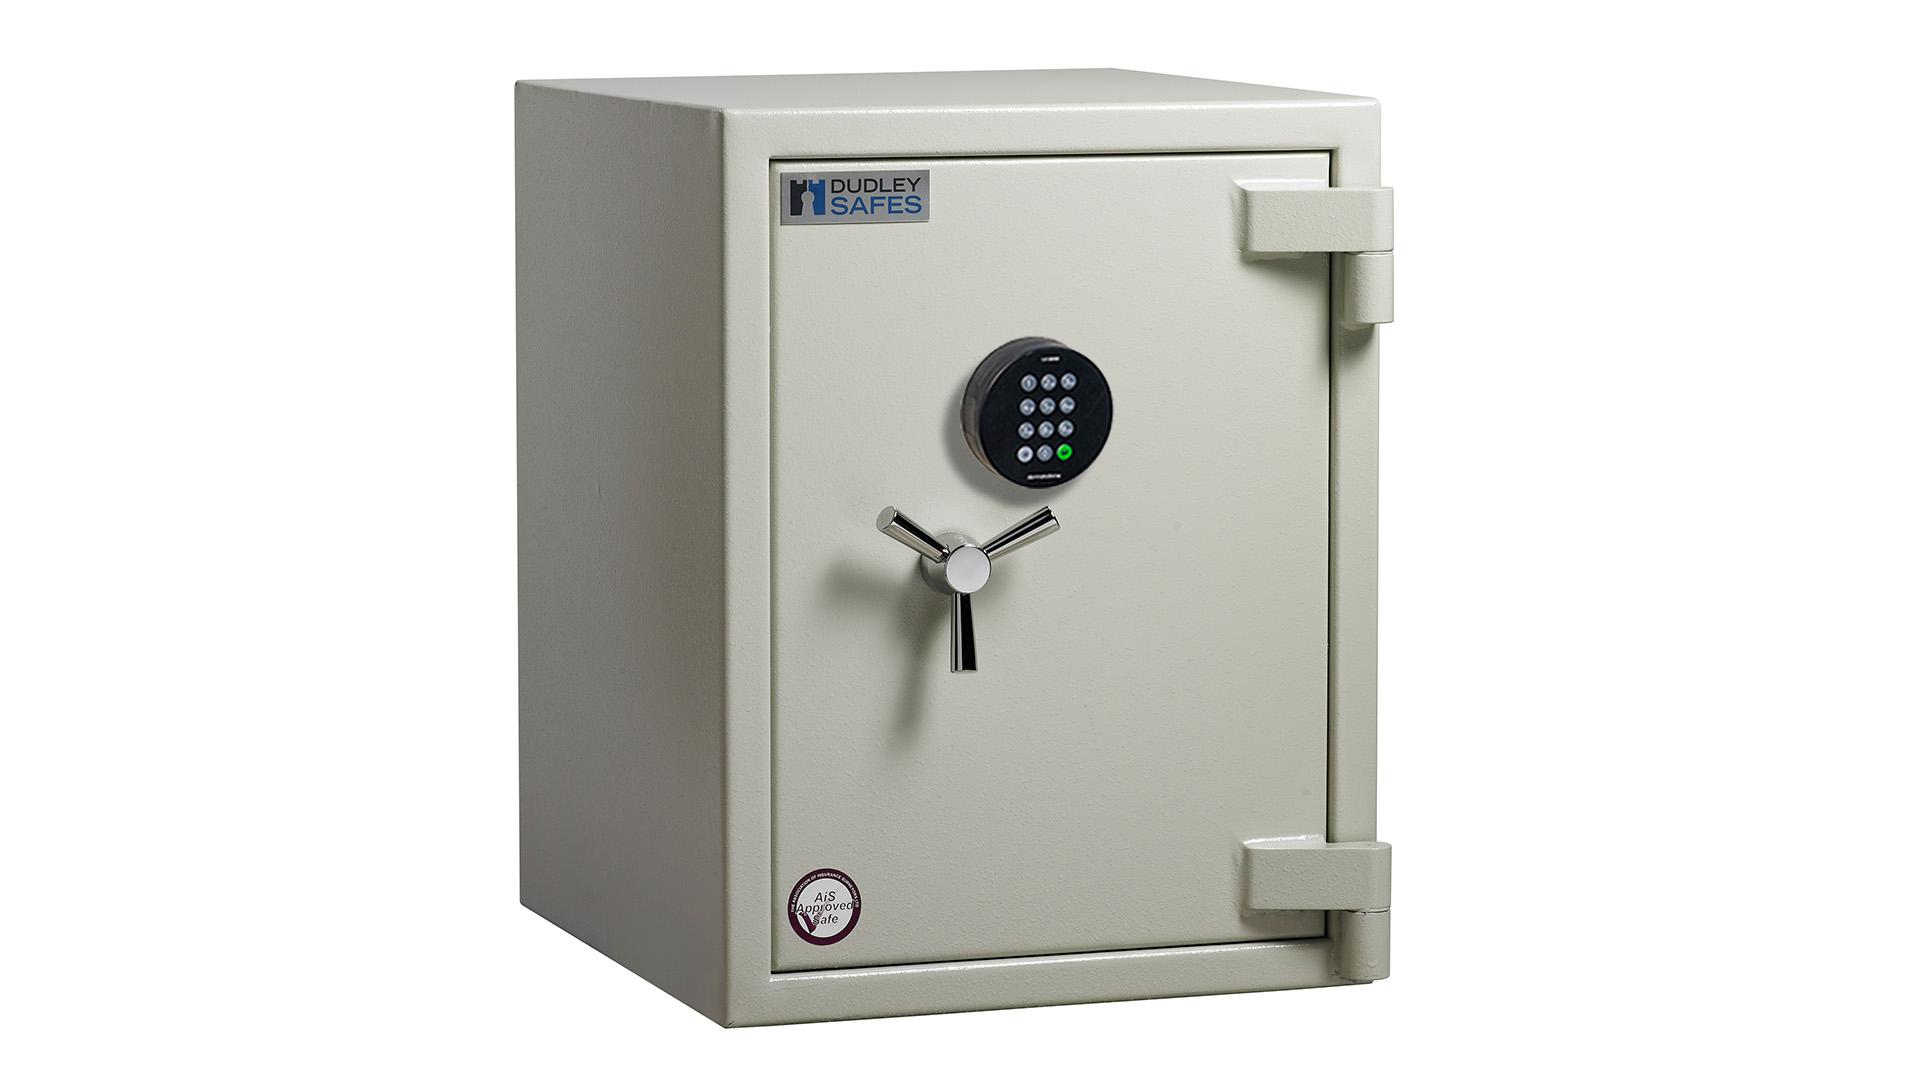 The Dudley Europa eur3-03e is a euro grade 3 hand build, heavy duty security safe that works well as a commercial safe, office safe and as a safe for the home. It offers a very high quality secure safe that comes with an electronic code lock.